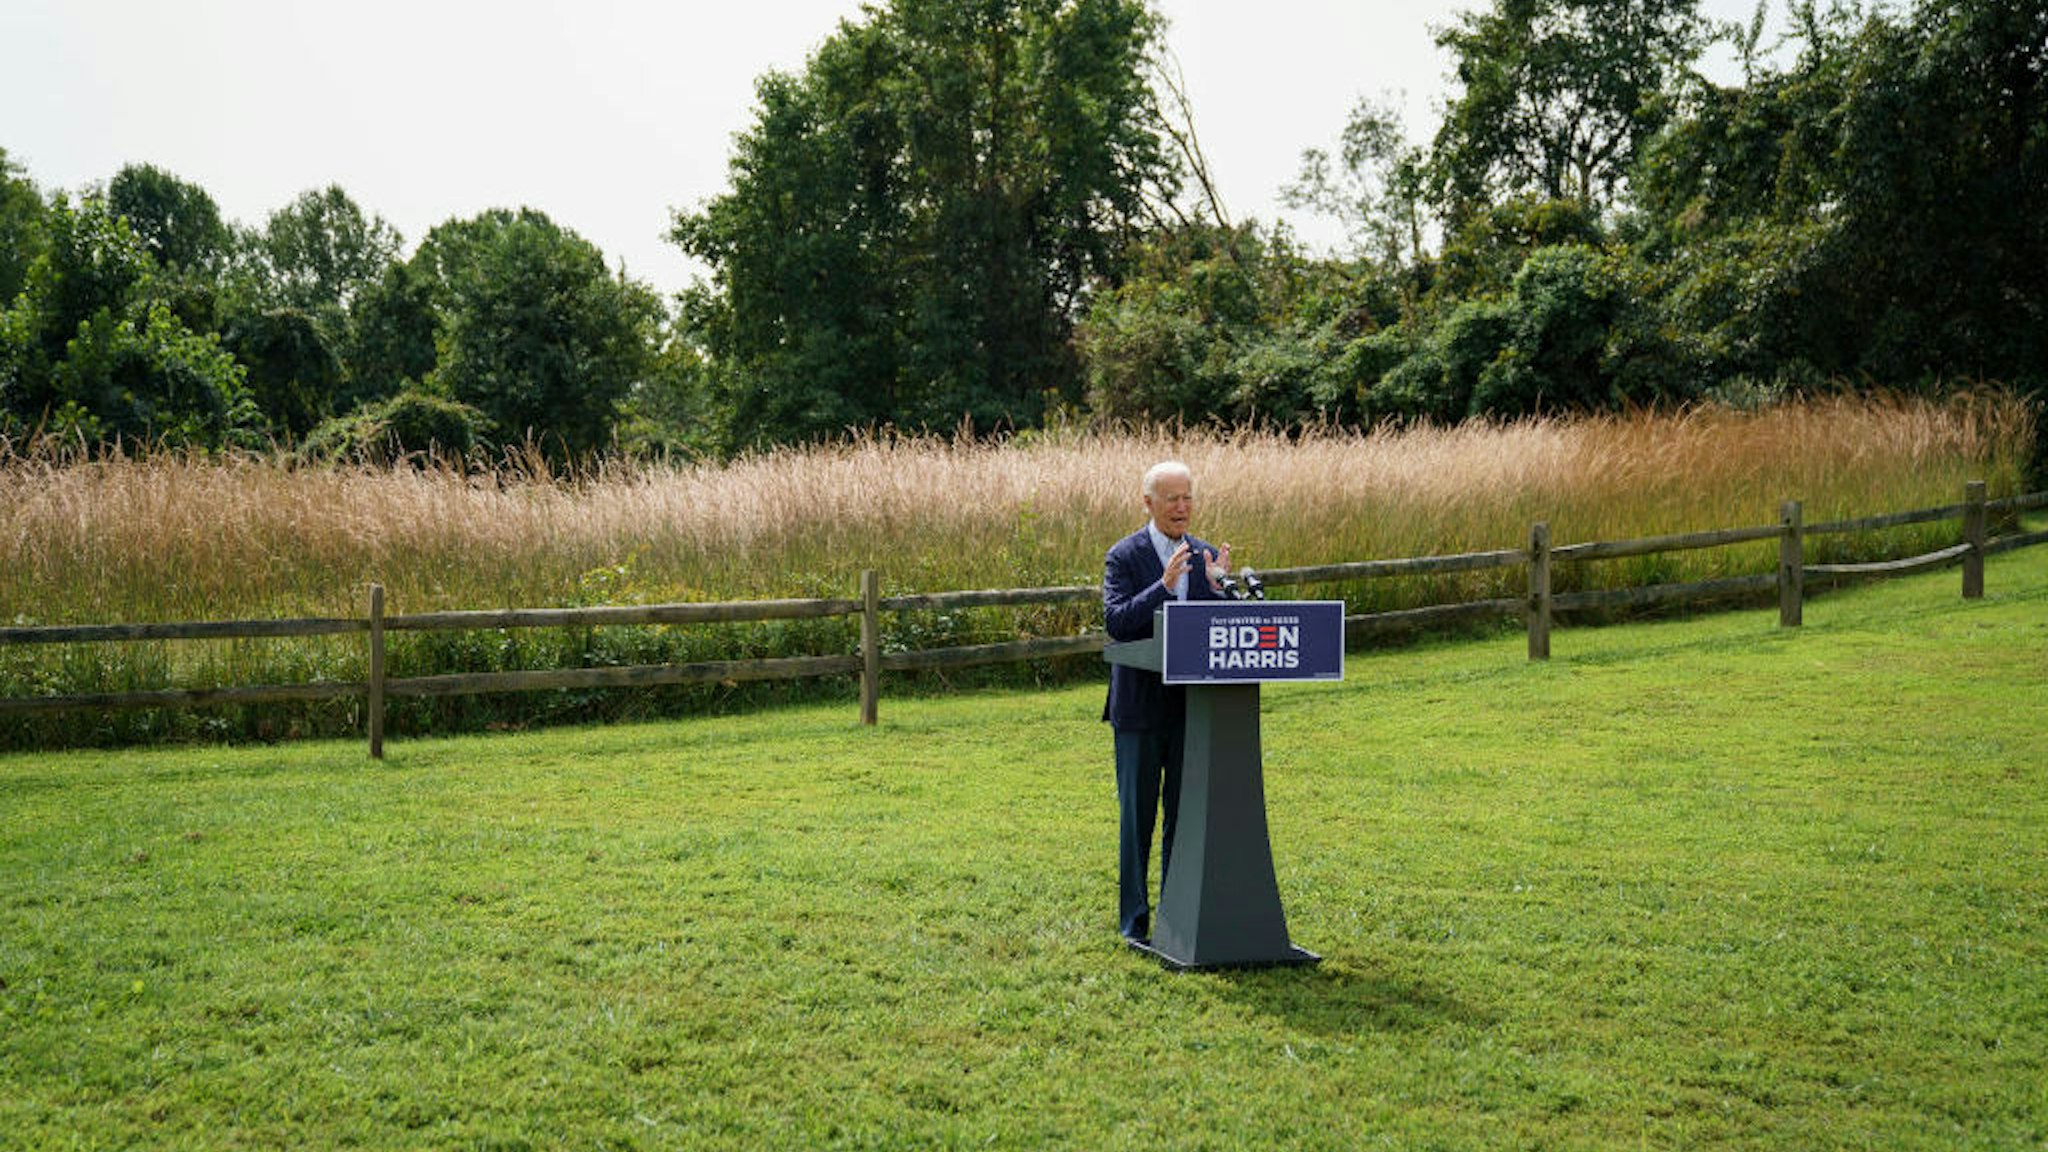 Democratic presidential nominee Joe Biden speaks about climate change and the wildfires on the West Coast at the Delaware Museum of Natural History on September 14, 2020 in Wilmington, Delaware. Biden has scheduled campaign stops in Florida, Pennsylvania and Minnesota later this week. (Photo by Drew Angerer/Getty Images)